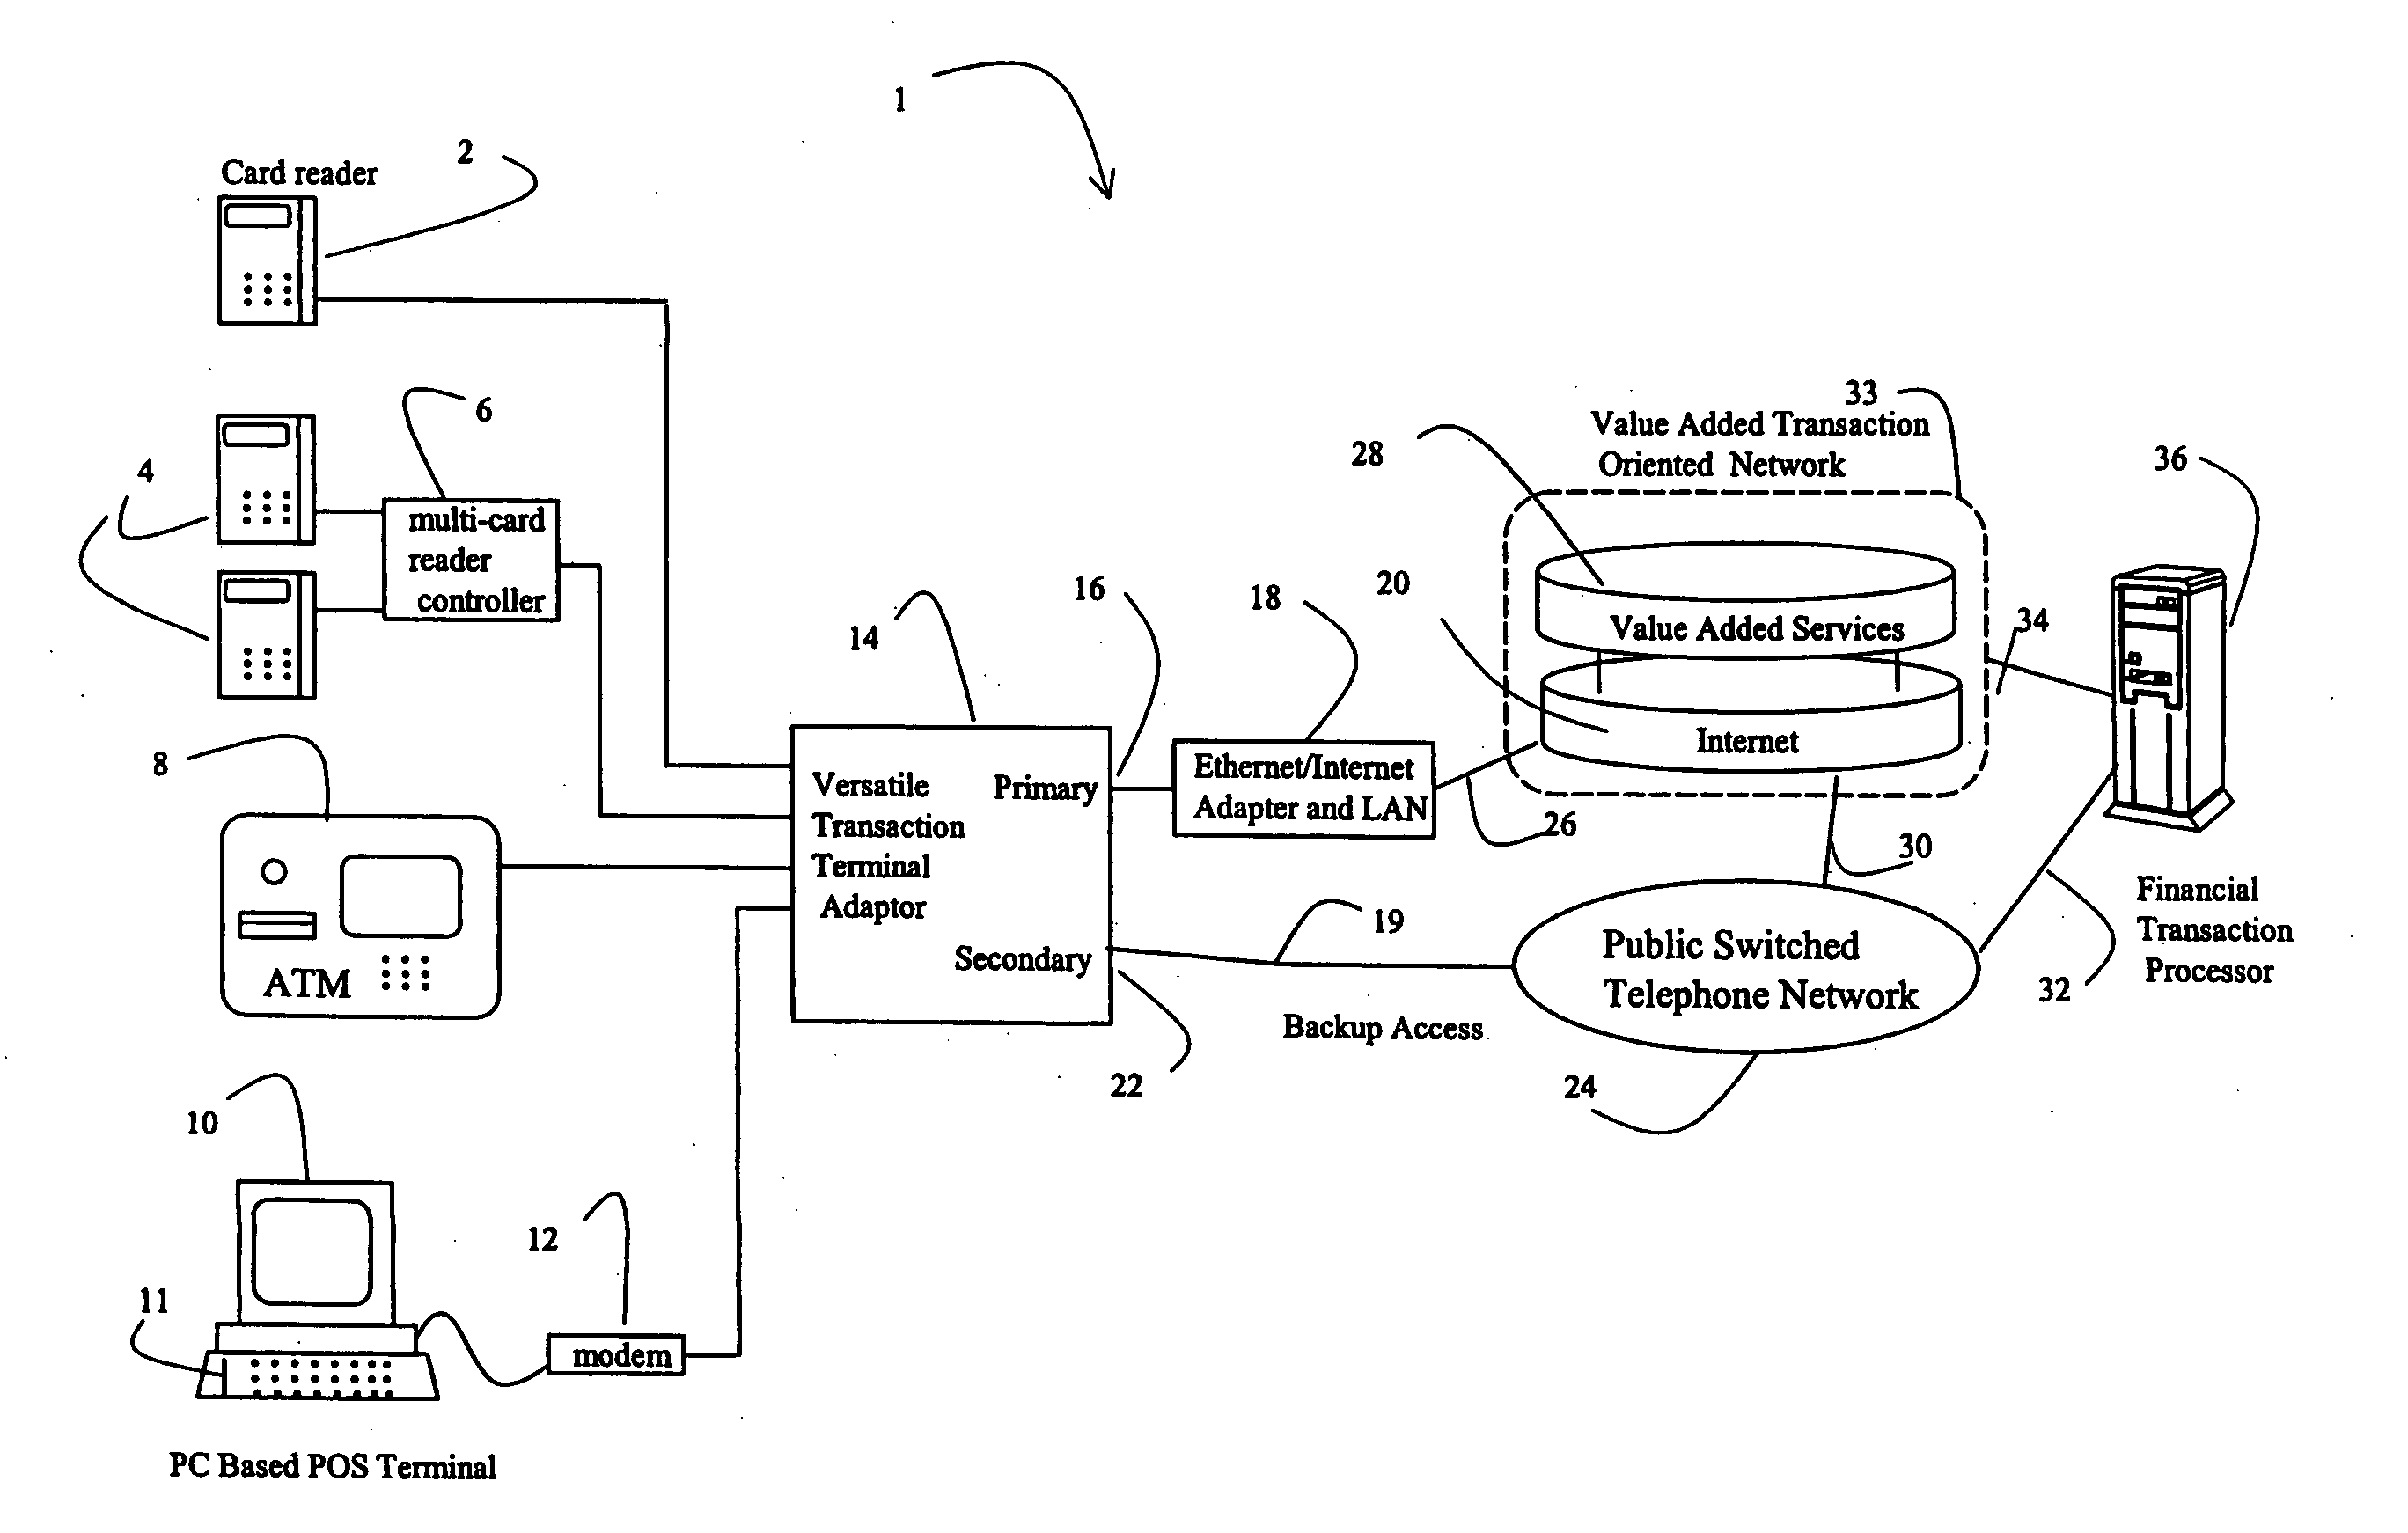 Versatile network operations center and network for transaction processing